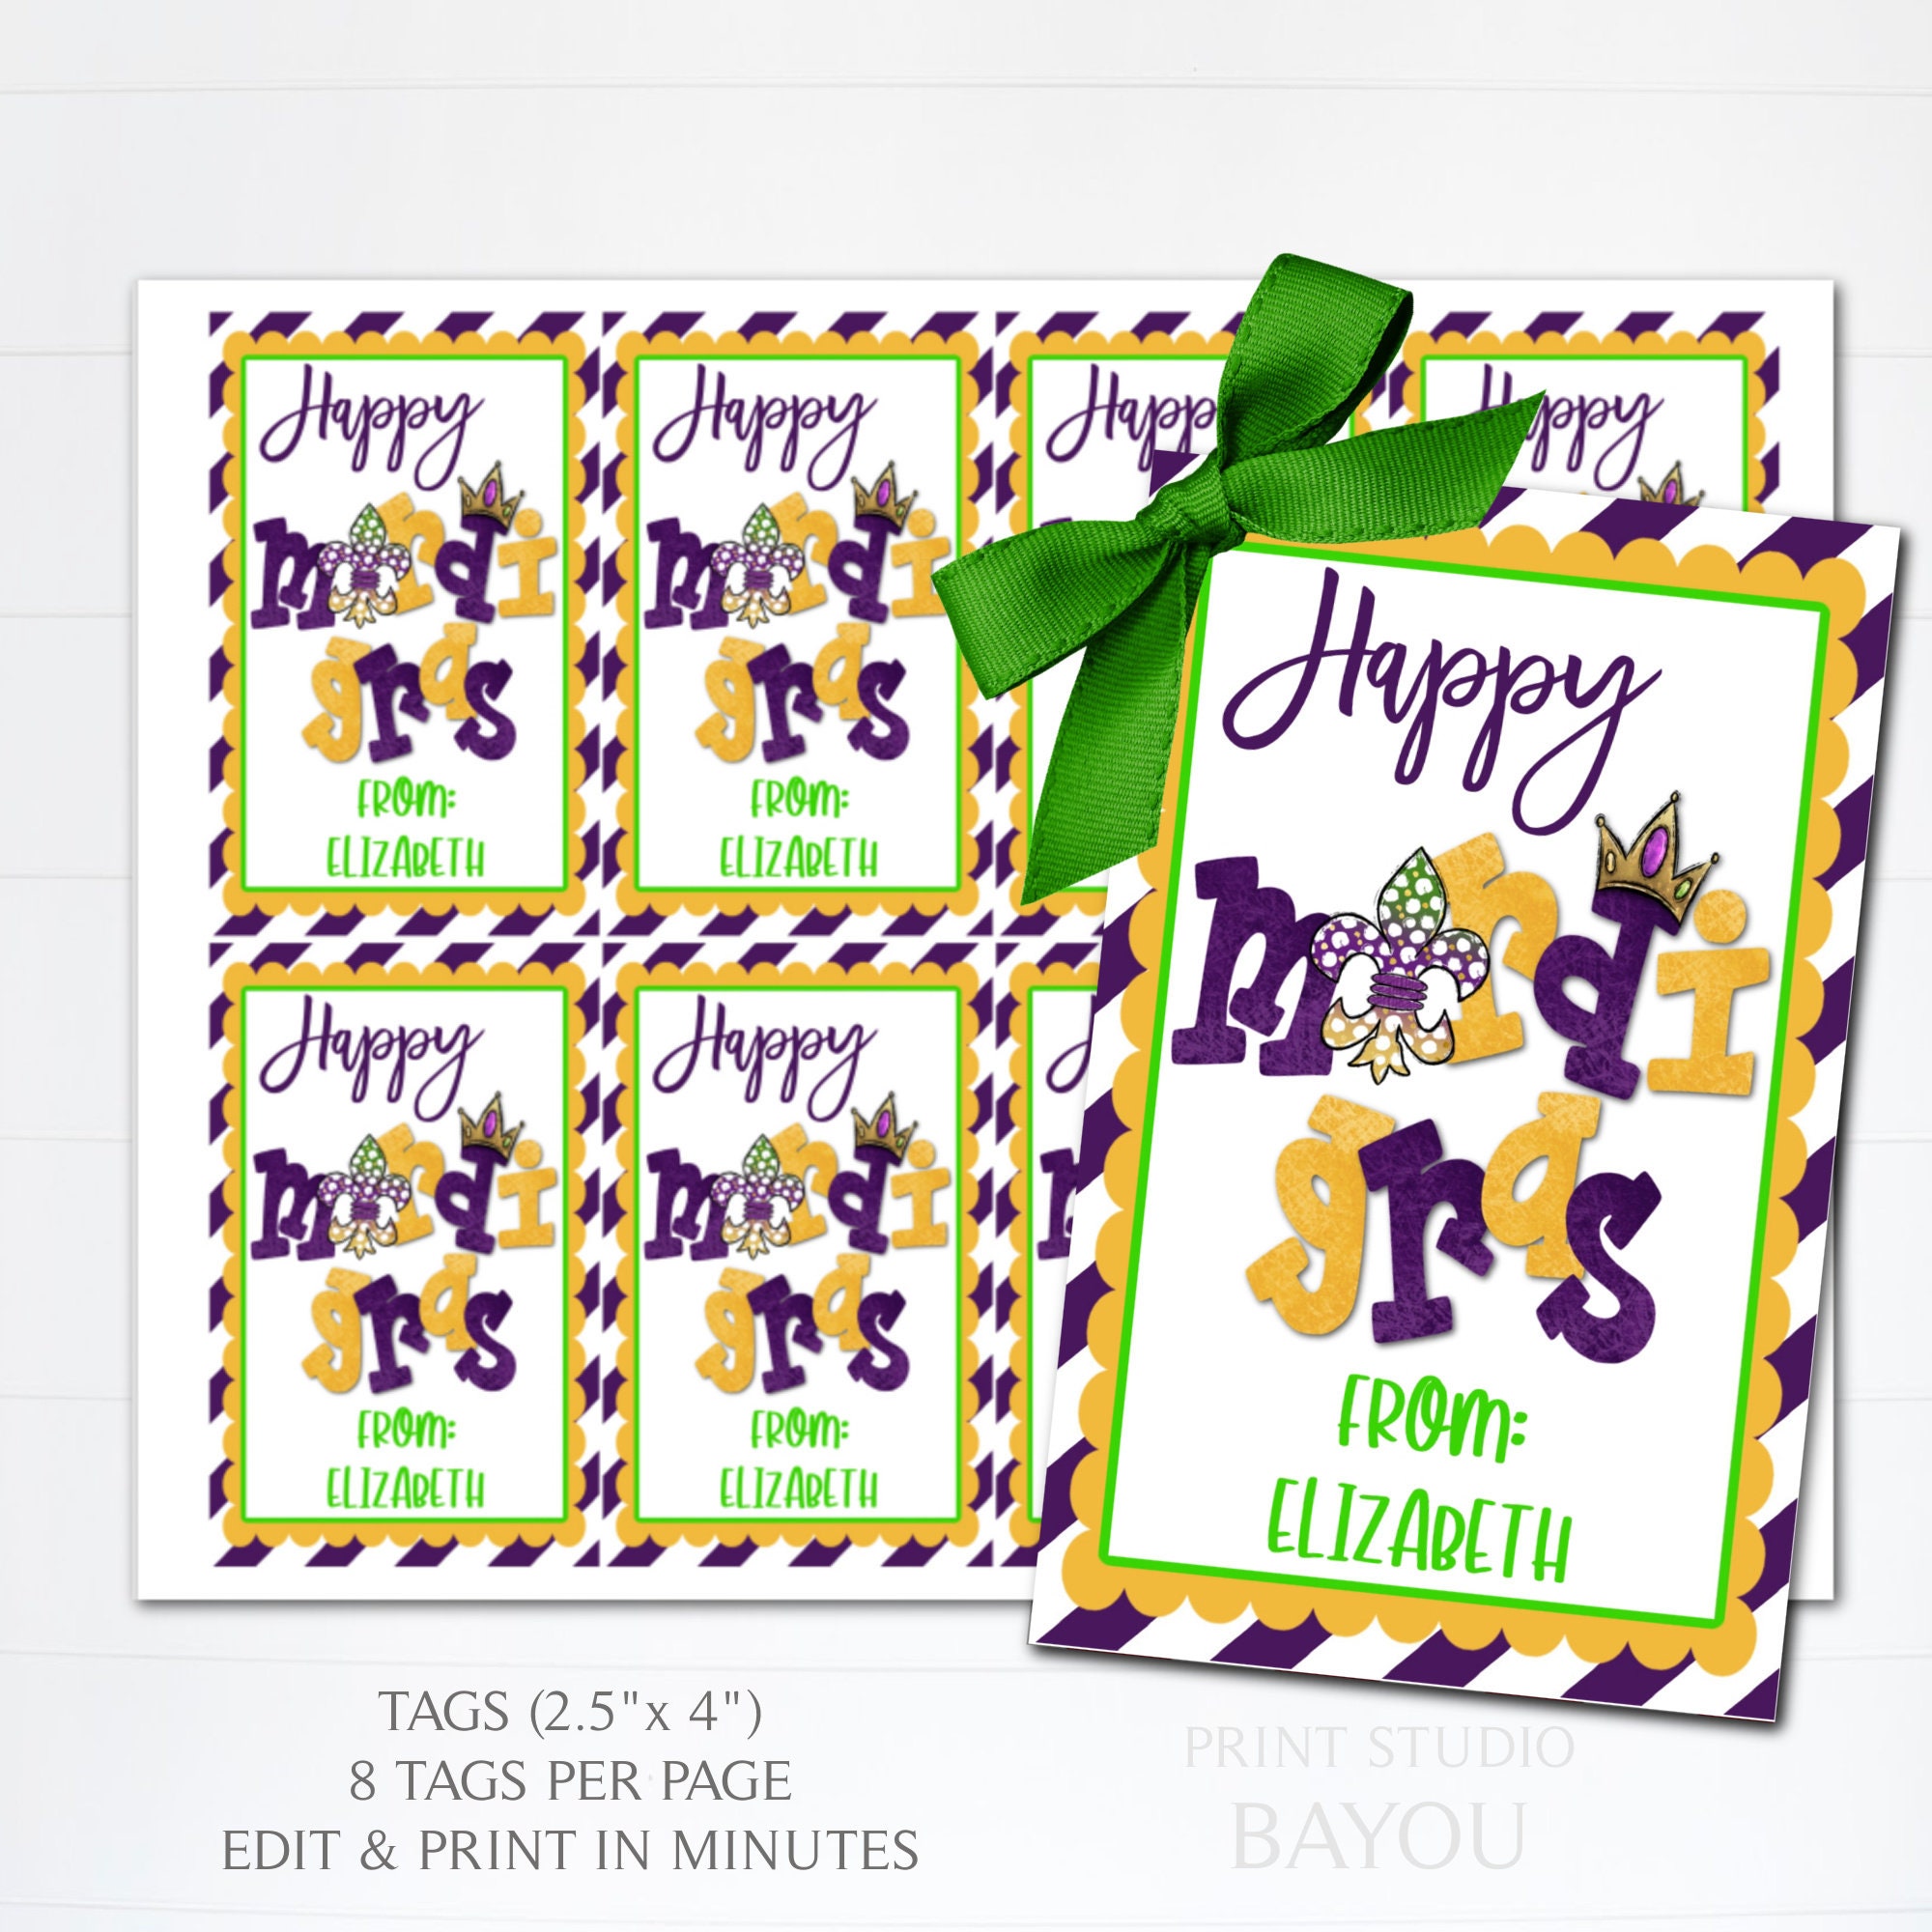 Big Dot of Happiness Mardi Gras - Assorted Masquerade Party Gift Tag Labels  - To and From Stickers - 12 Sheets - 120 Stickers